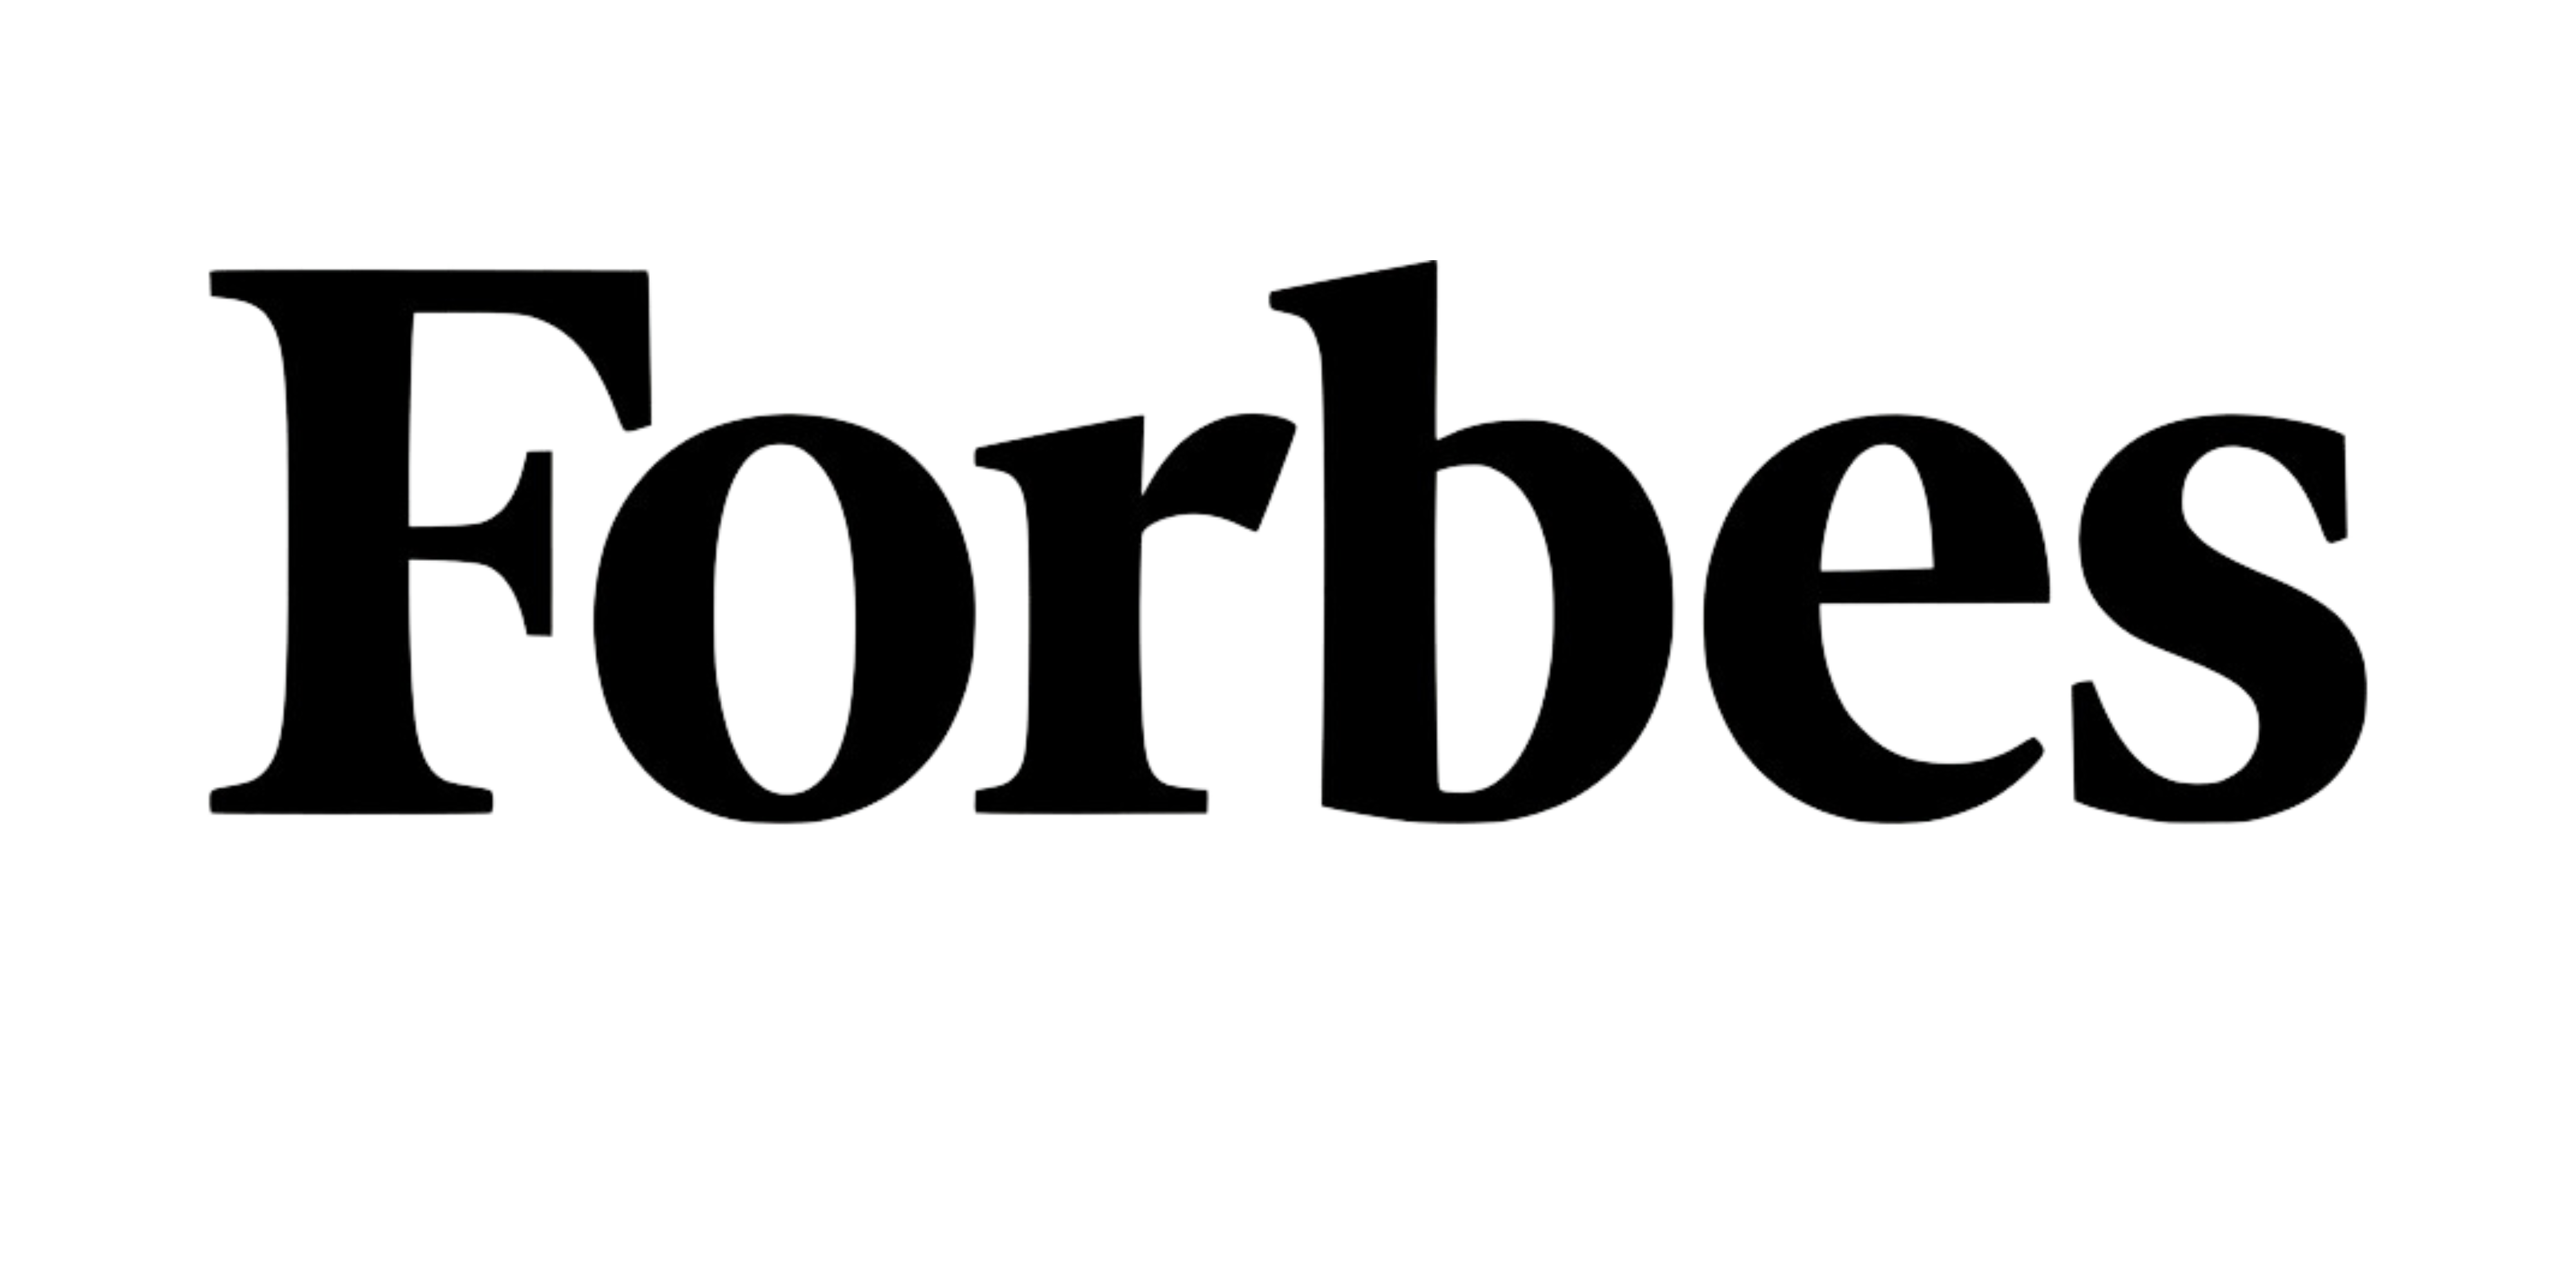 forbes kaipod learning feature